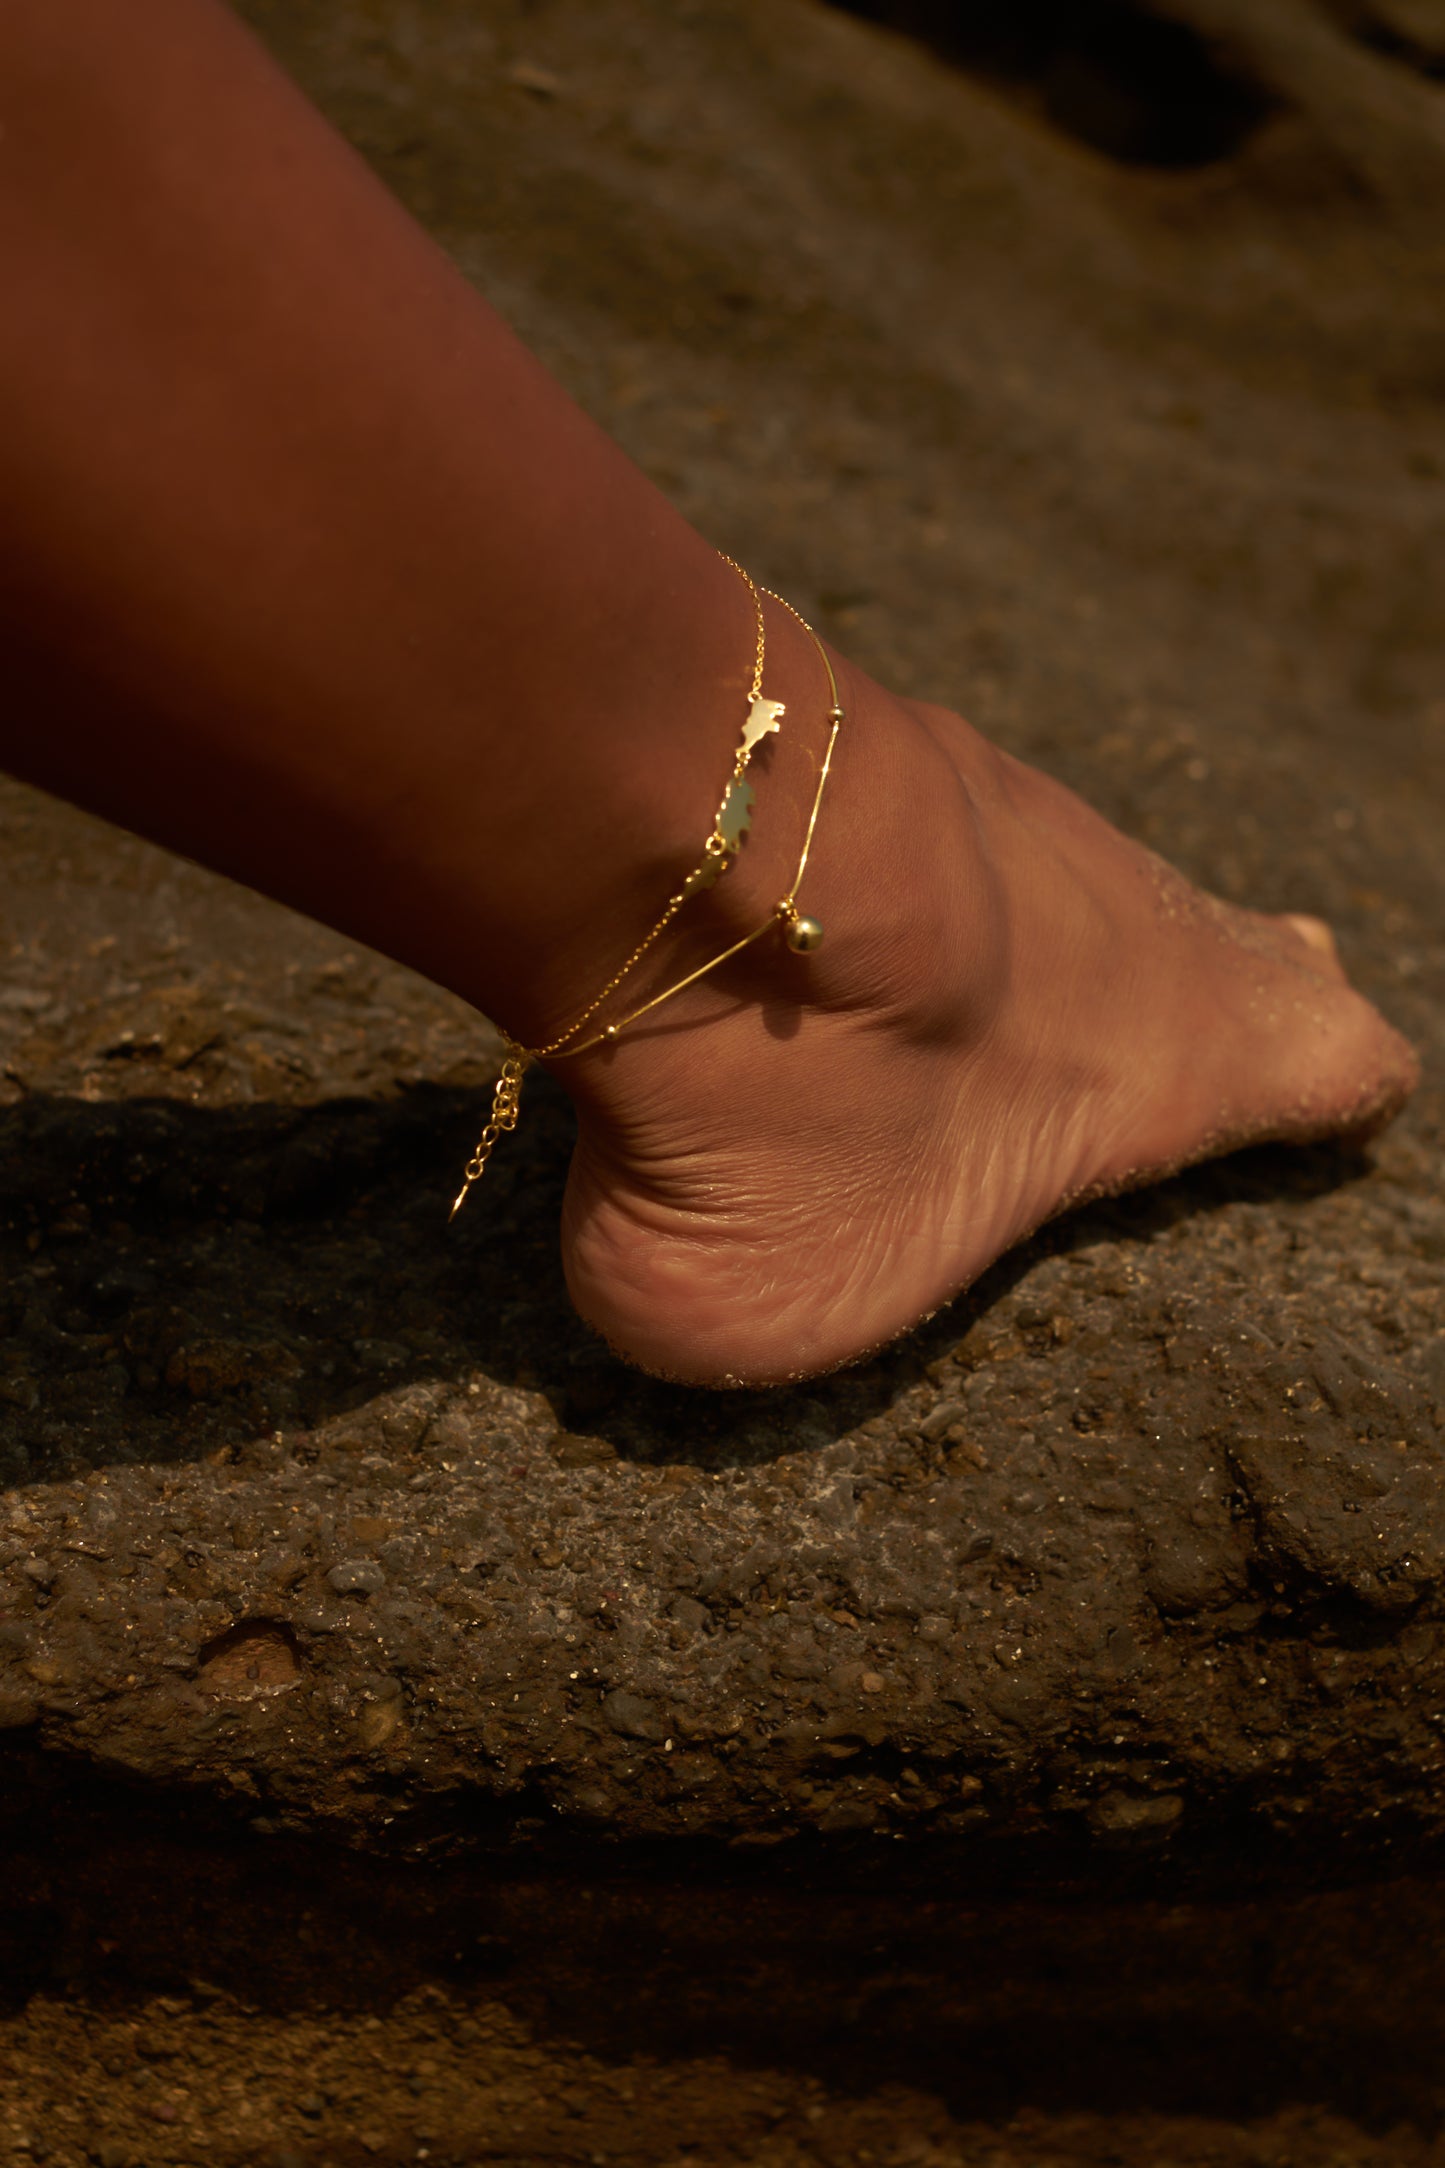 ELEPHANT CHAIN ANKLET